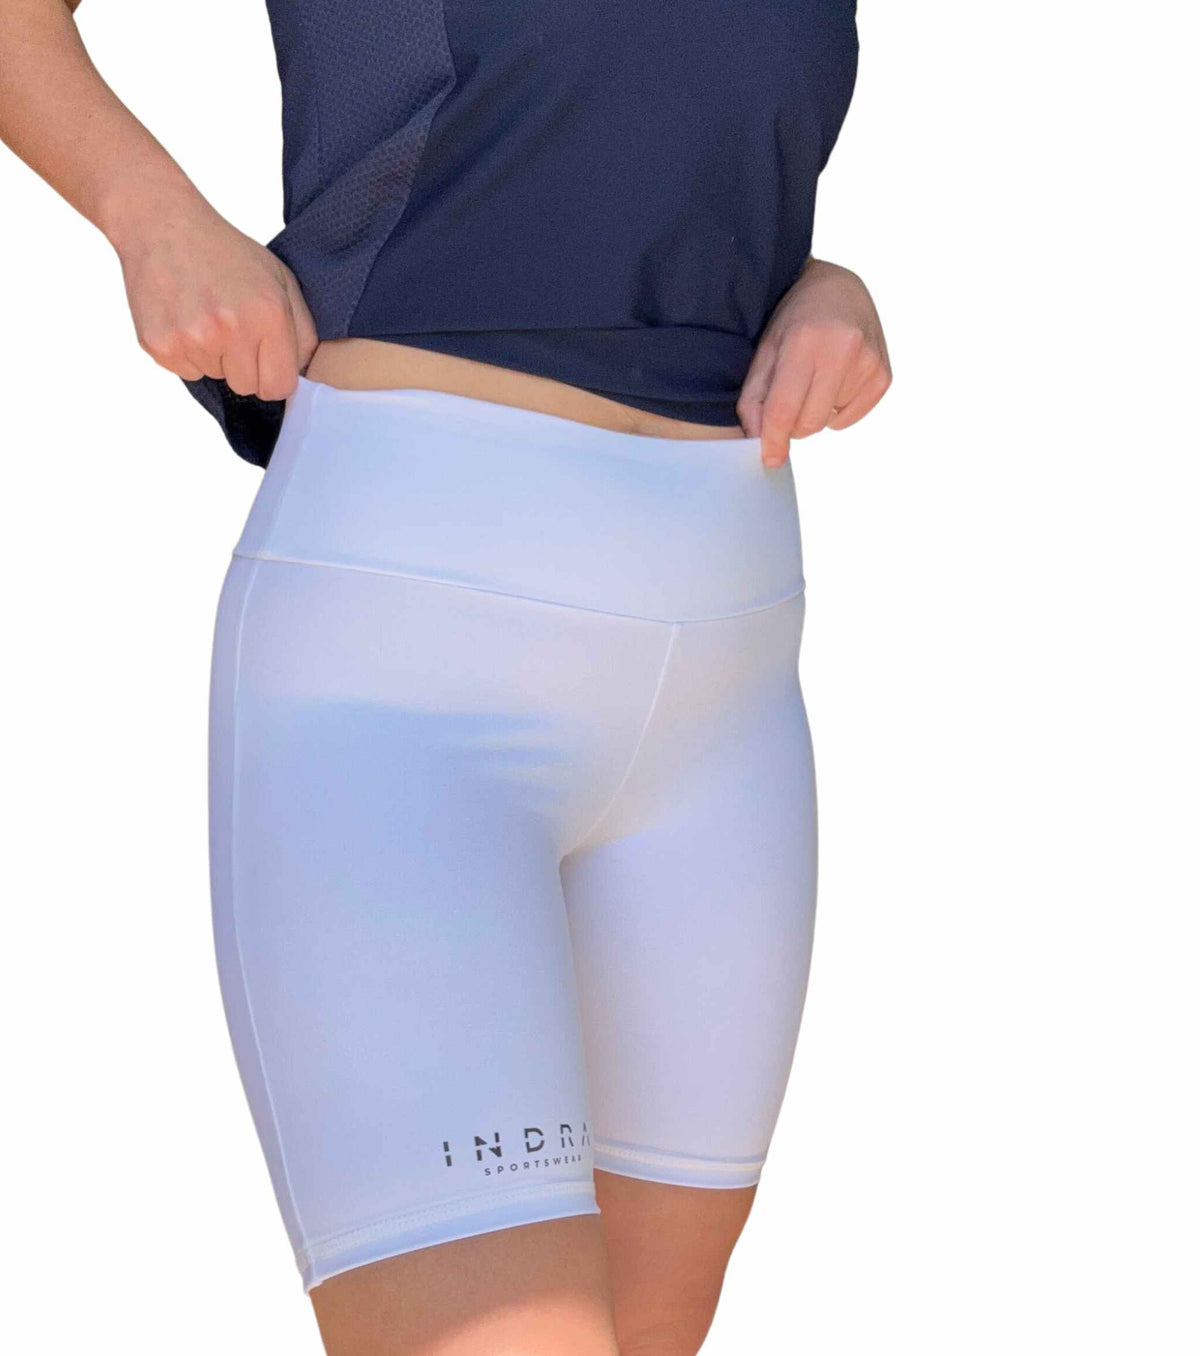 High waist undershorts/undershorts perfect for golf skirts and dresses –  INDRA Sportswear